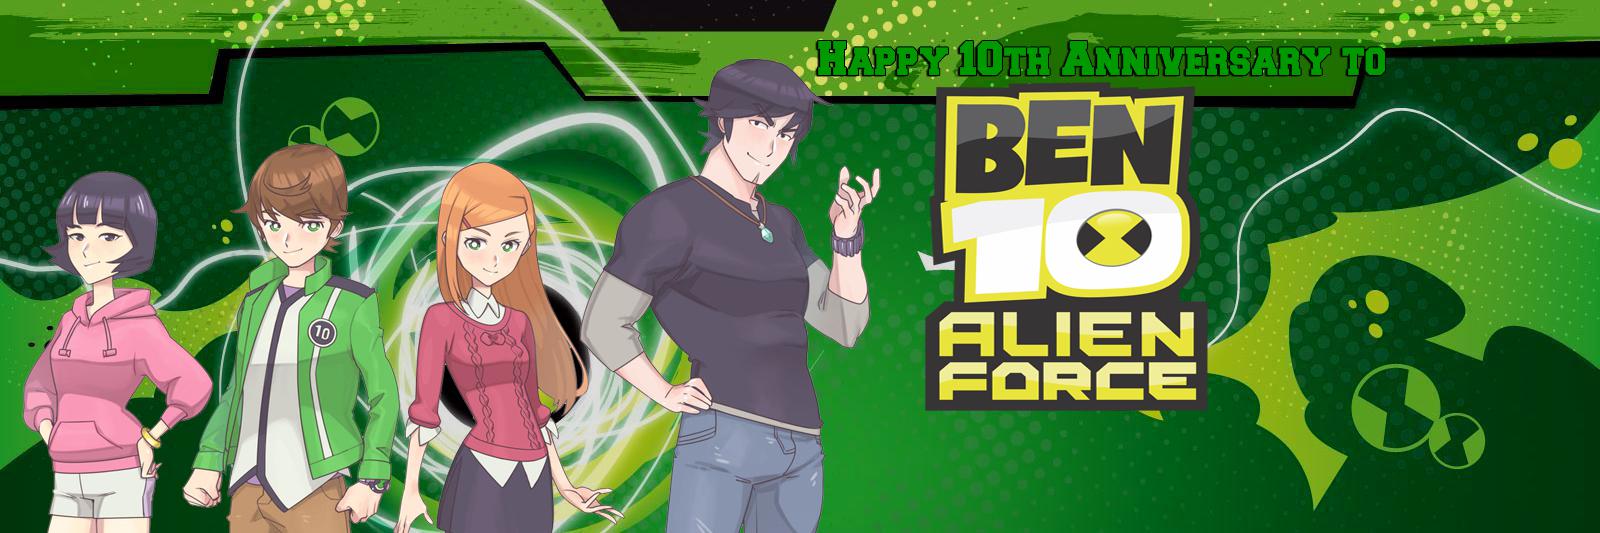 Ben 10: Alien Force: A 10th Anniversary special Art by lysergic44 and Wallpaper by Snitchpogi12. PS: It was 2 years ago